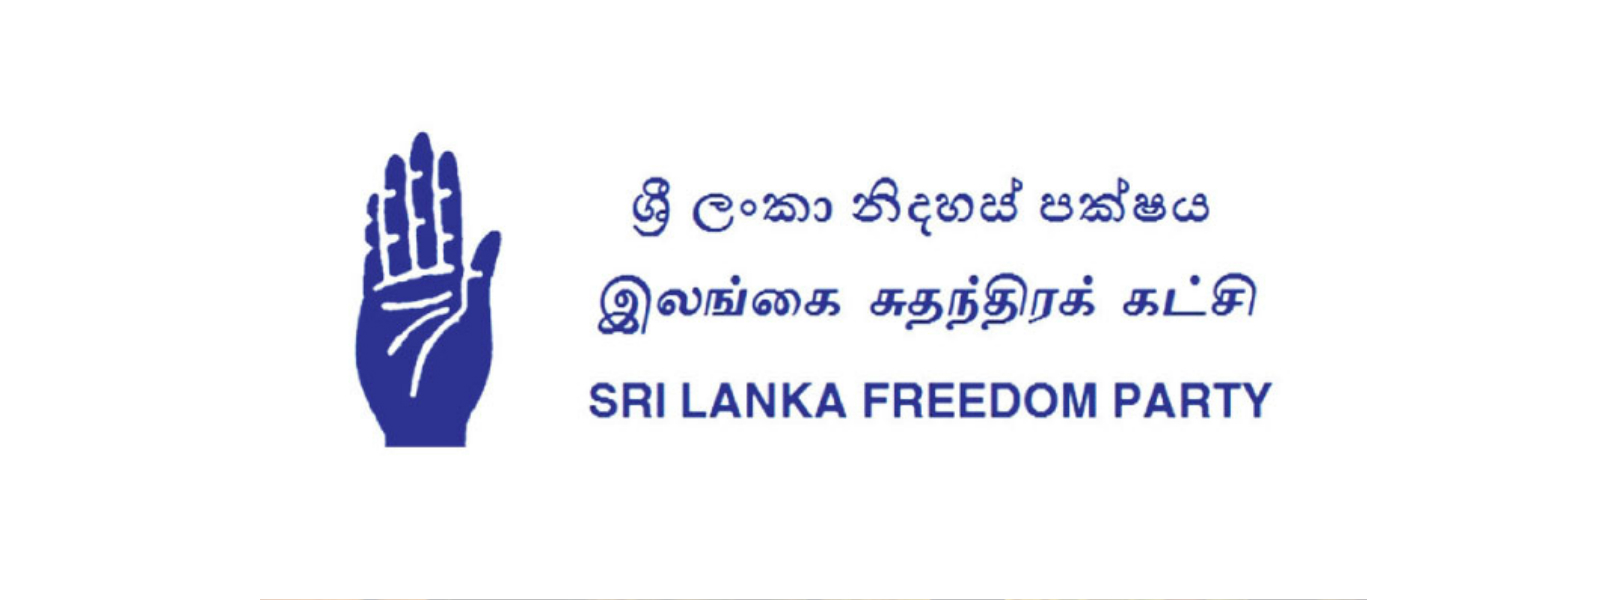 New district leaders appointed for the SLFP 